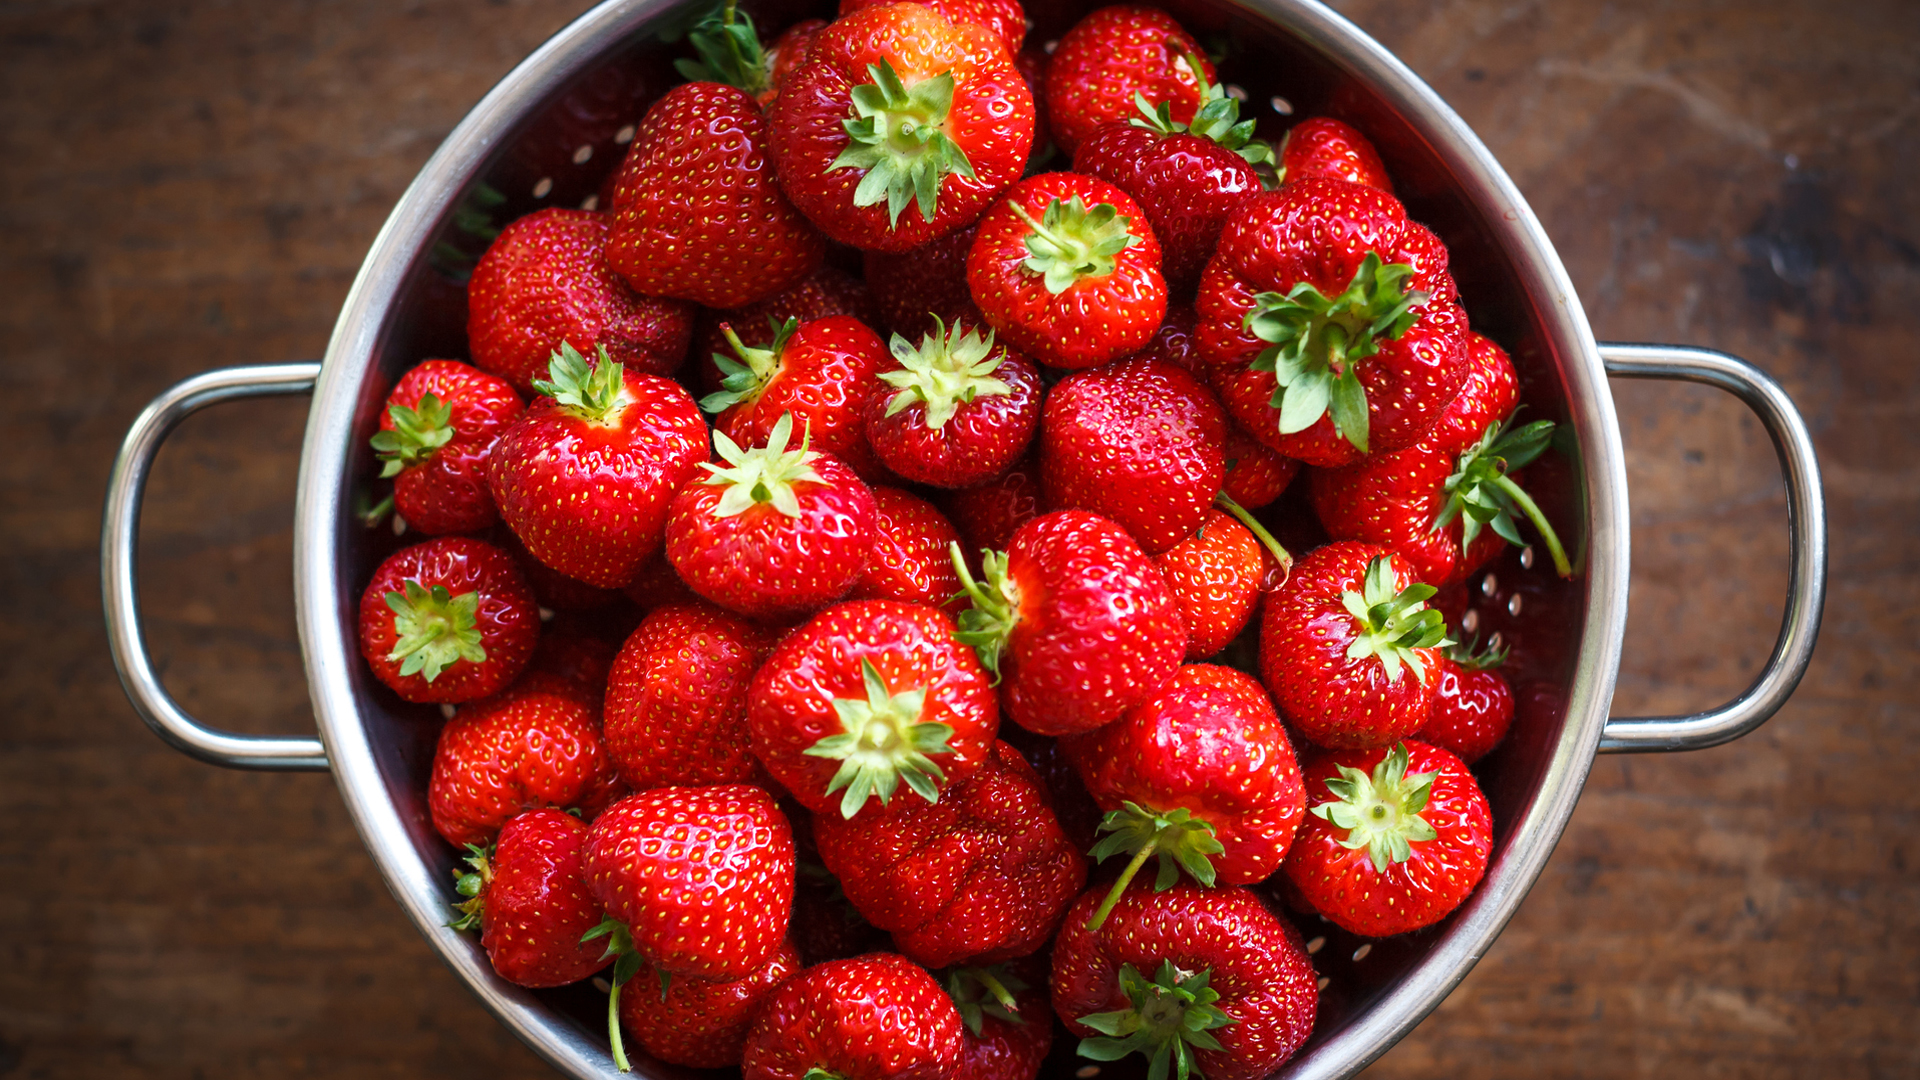 strawberries are a good low sugar fruit